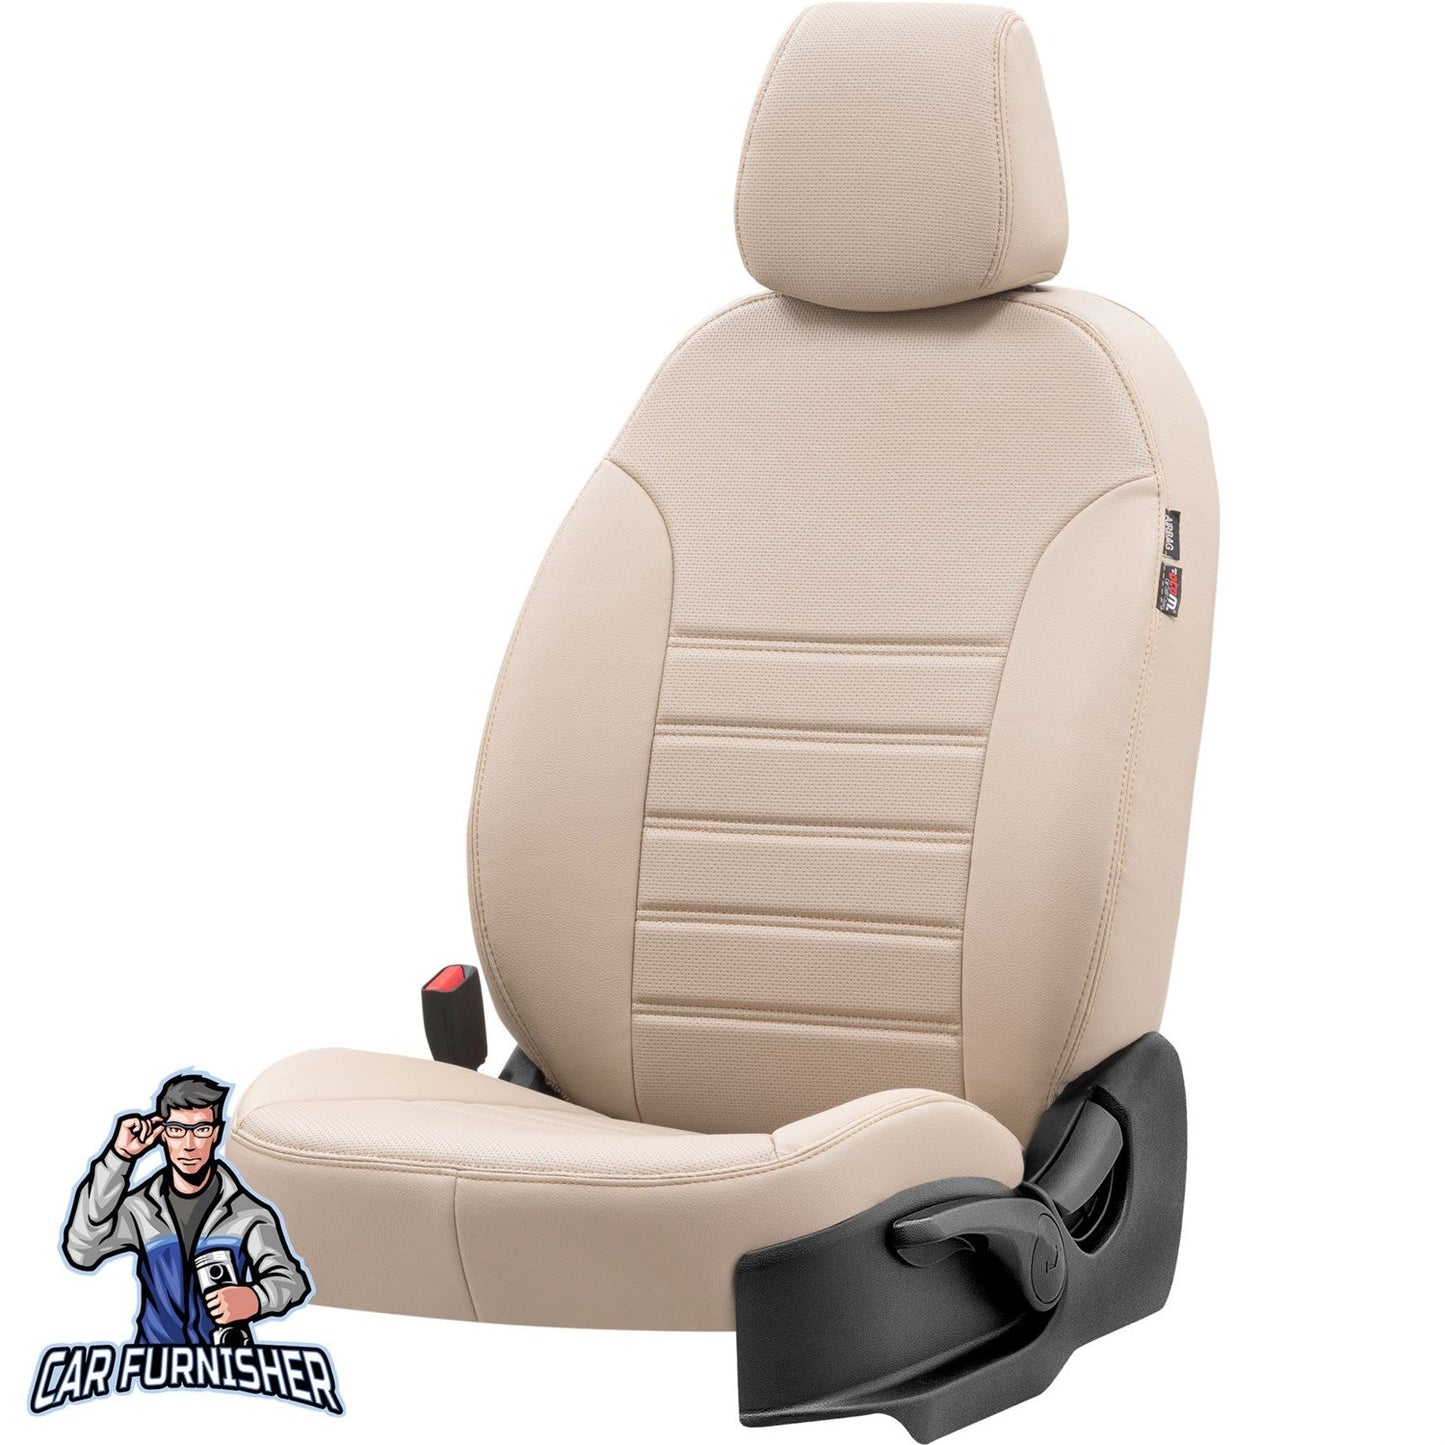 Mercedes B Class Seat Covers New York Leather Design Beige Leather